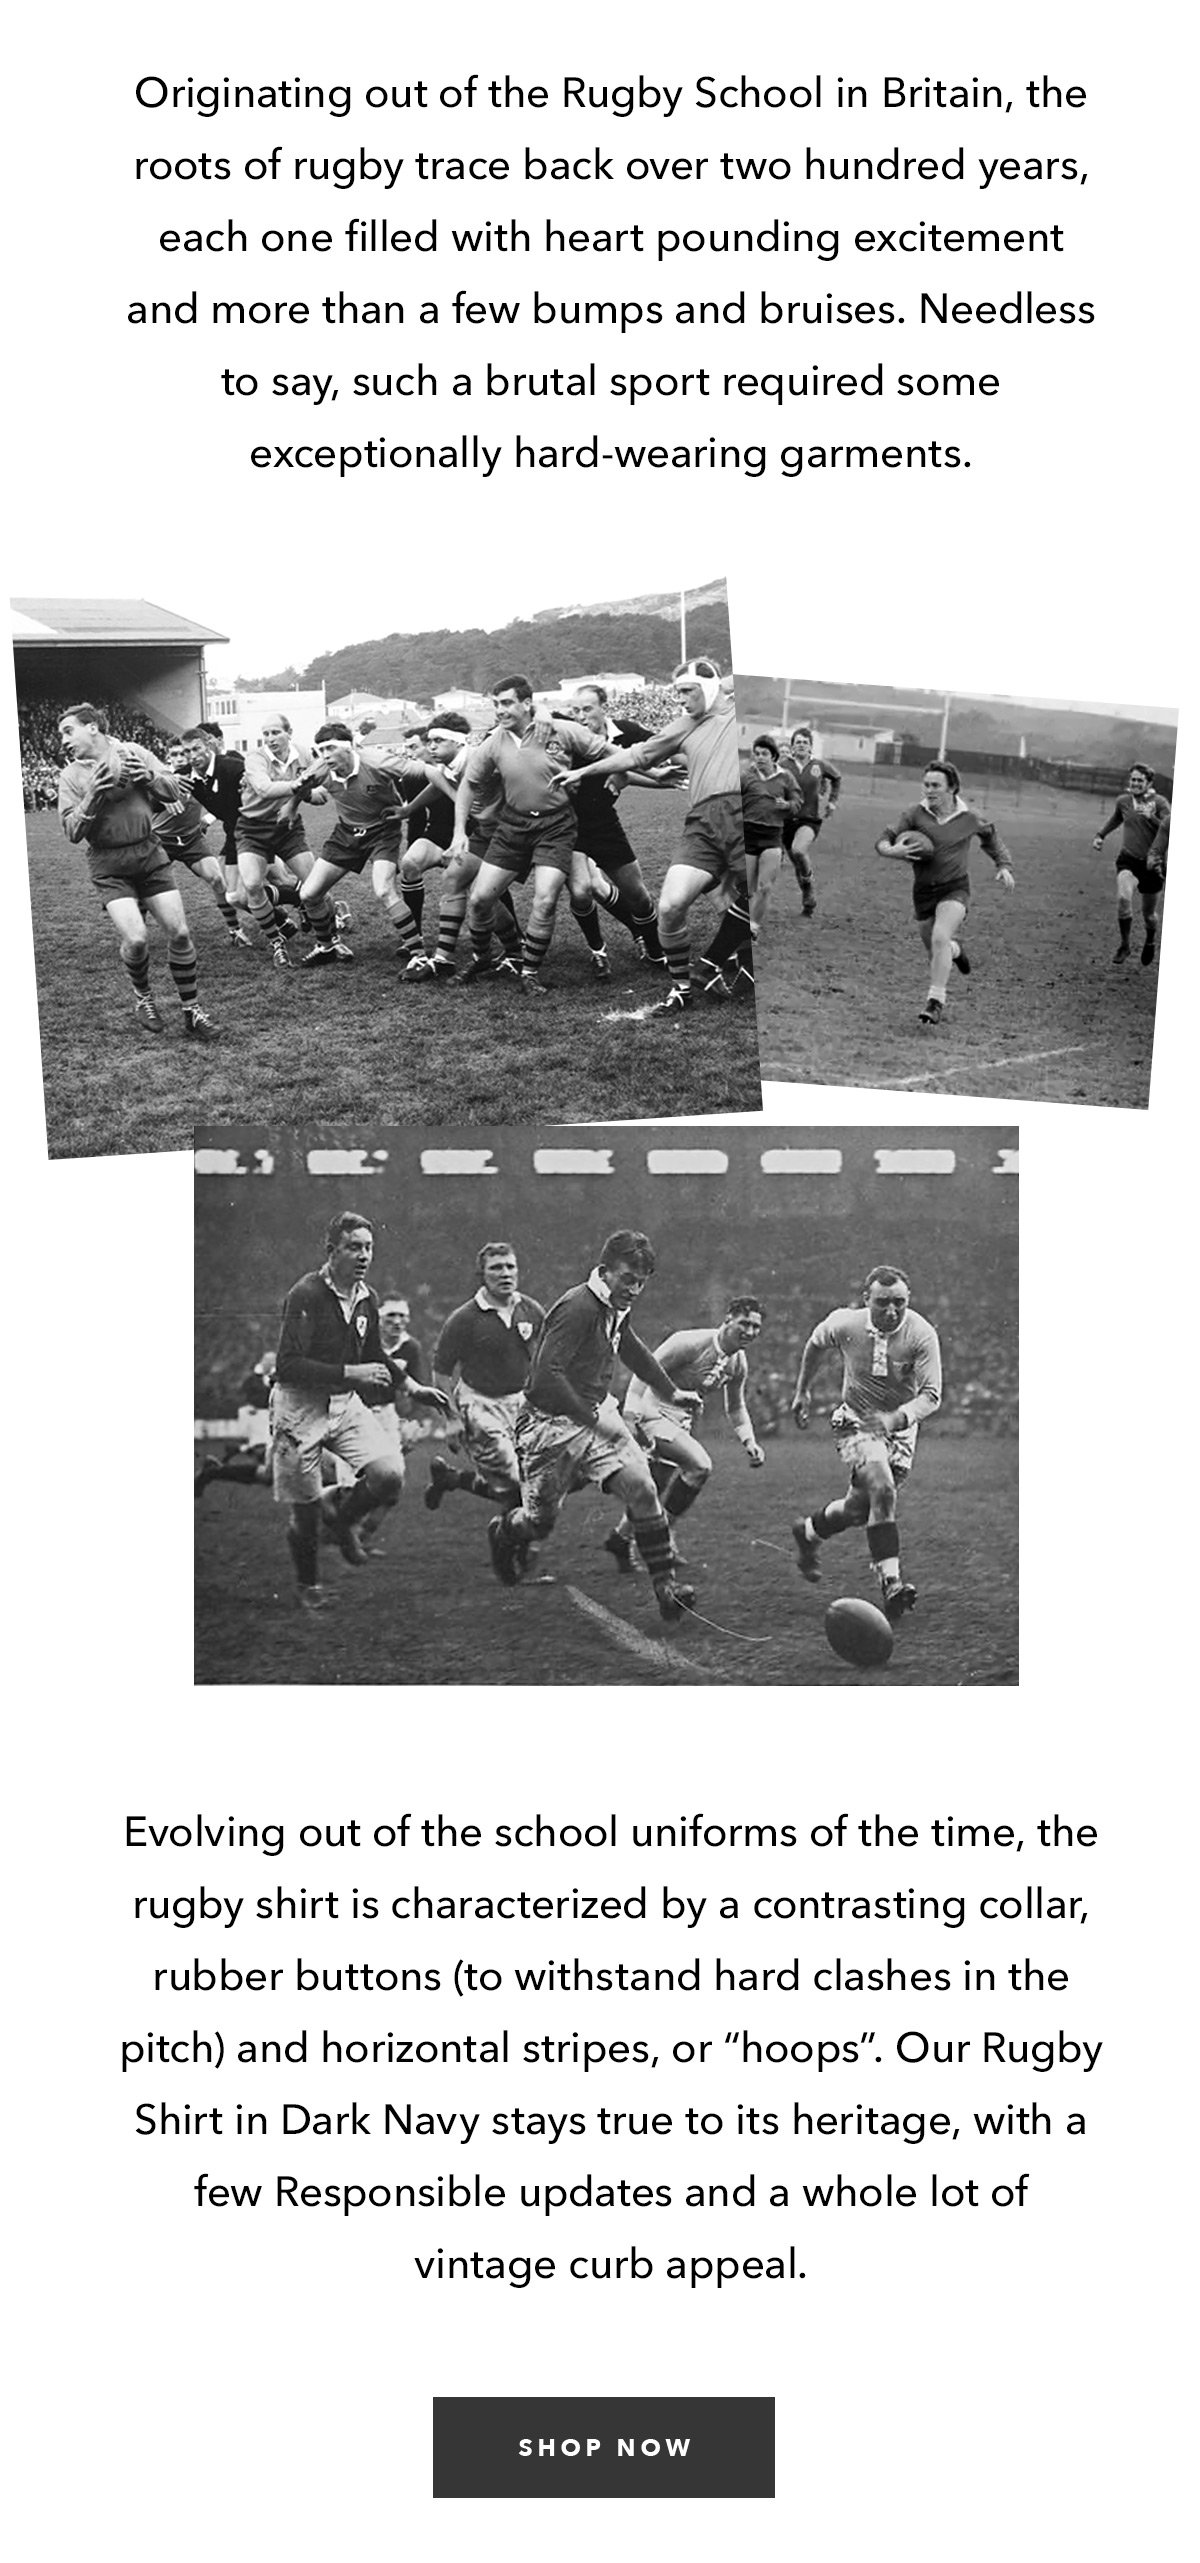  Originating out of the Rugby School in Britain, the roots of rugby trace back over two hundred years, each one filled with heart pounding excitement and more than a few bumps and bruises. Needless to say, such a brutal sport required some exceptionally hard-wearing garments.   Evolving out of the school uniforms of the time, the rugby shirt is characterized by a contrasting collar, rubber buttons (to withstand hard clashes in the pitch) and horizontal stripes, or “hoops”. Our Rugby Shirt in Dark Navy stays true to its heritage, with a few Responsible updates and a whole lot of vintage curb appeal.